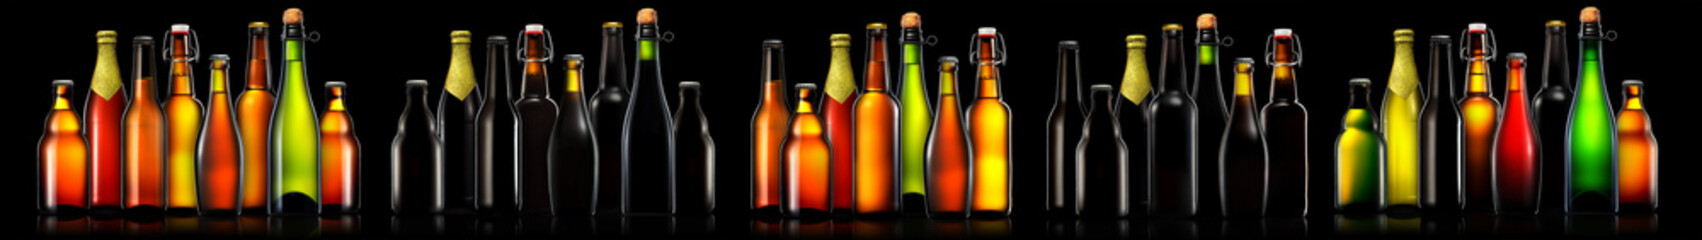 Set of beer, wine and champagne bottles isolated on black background